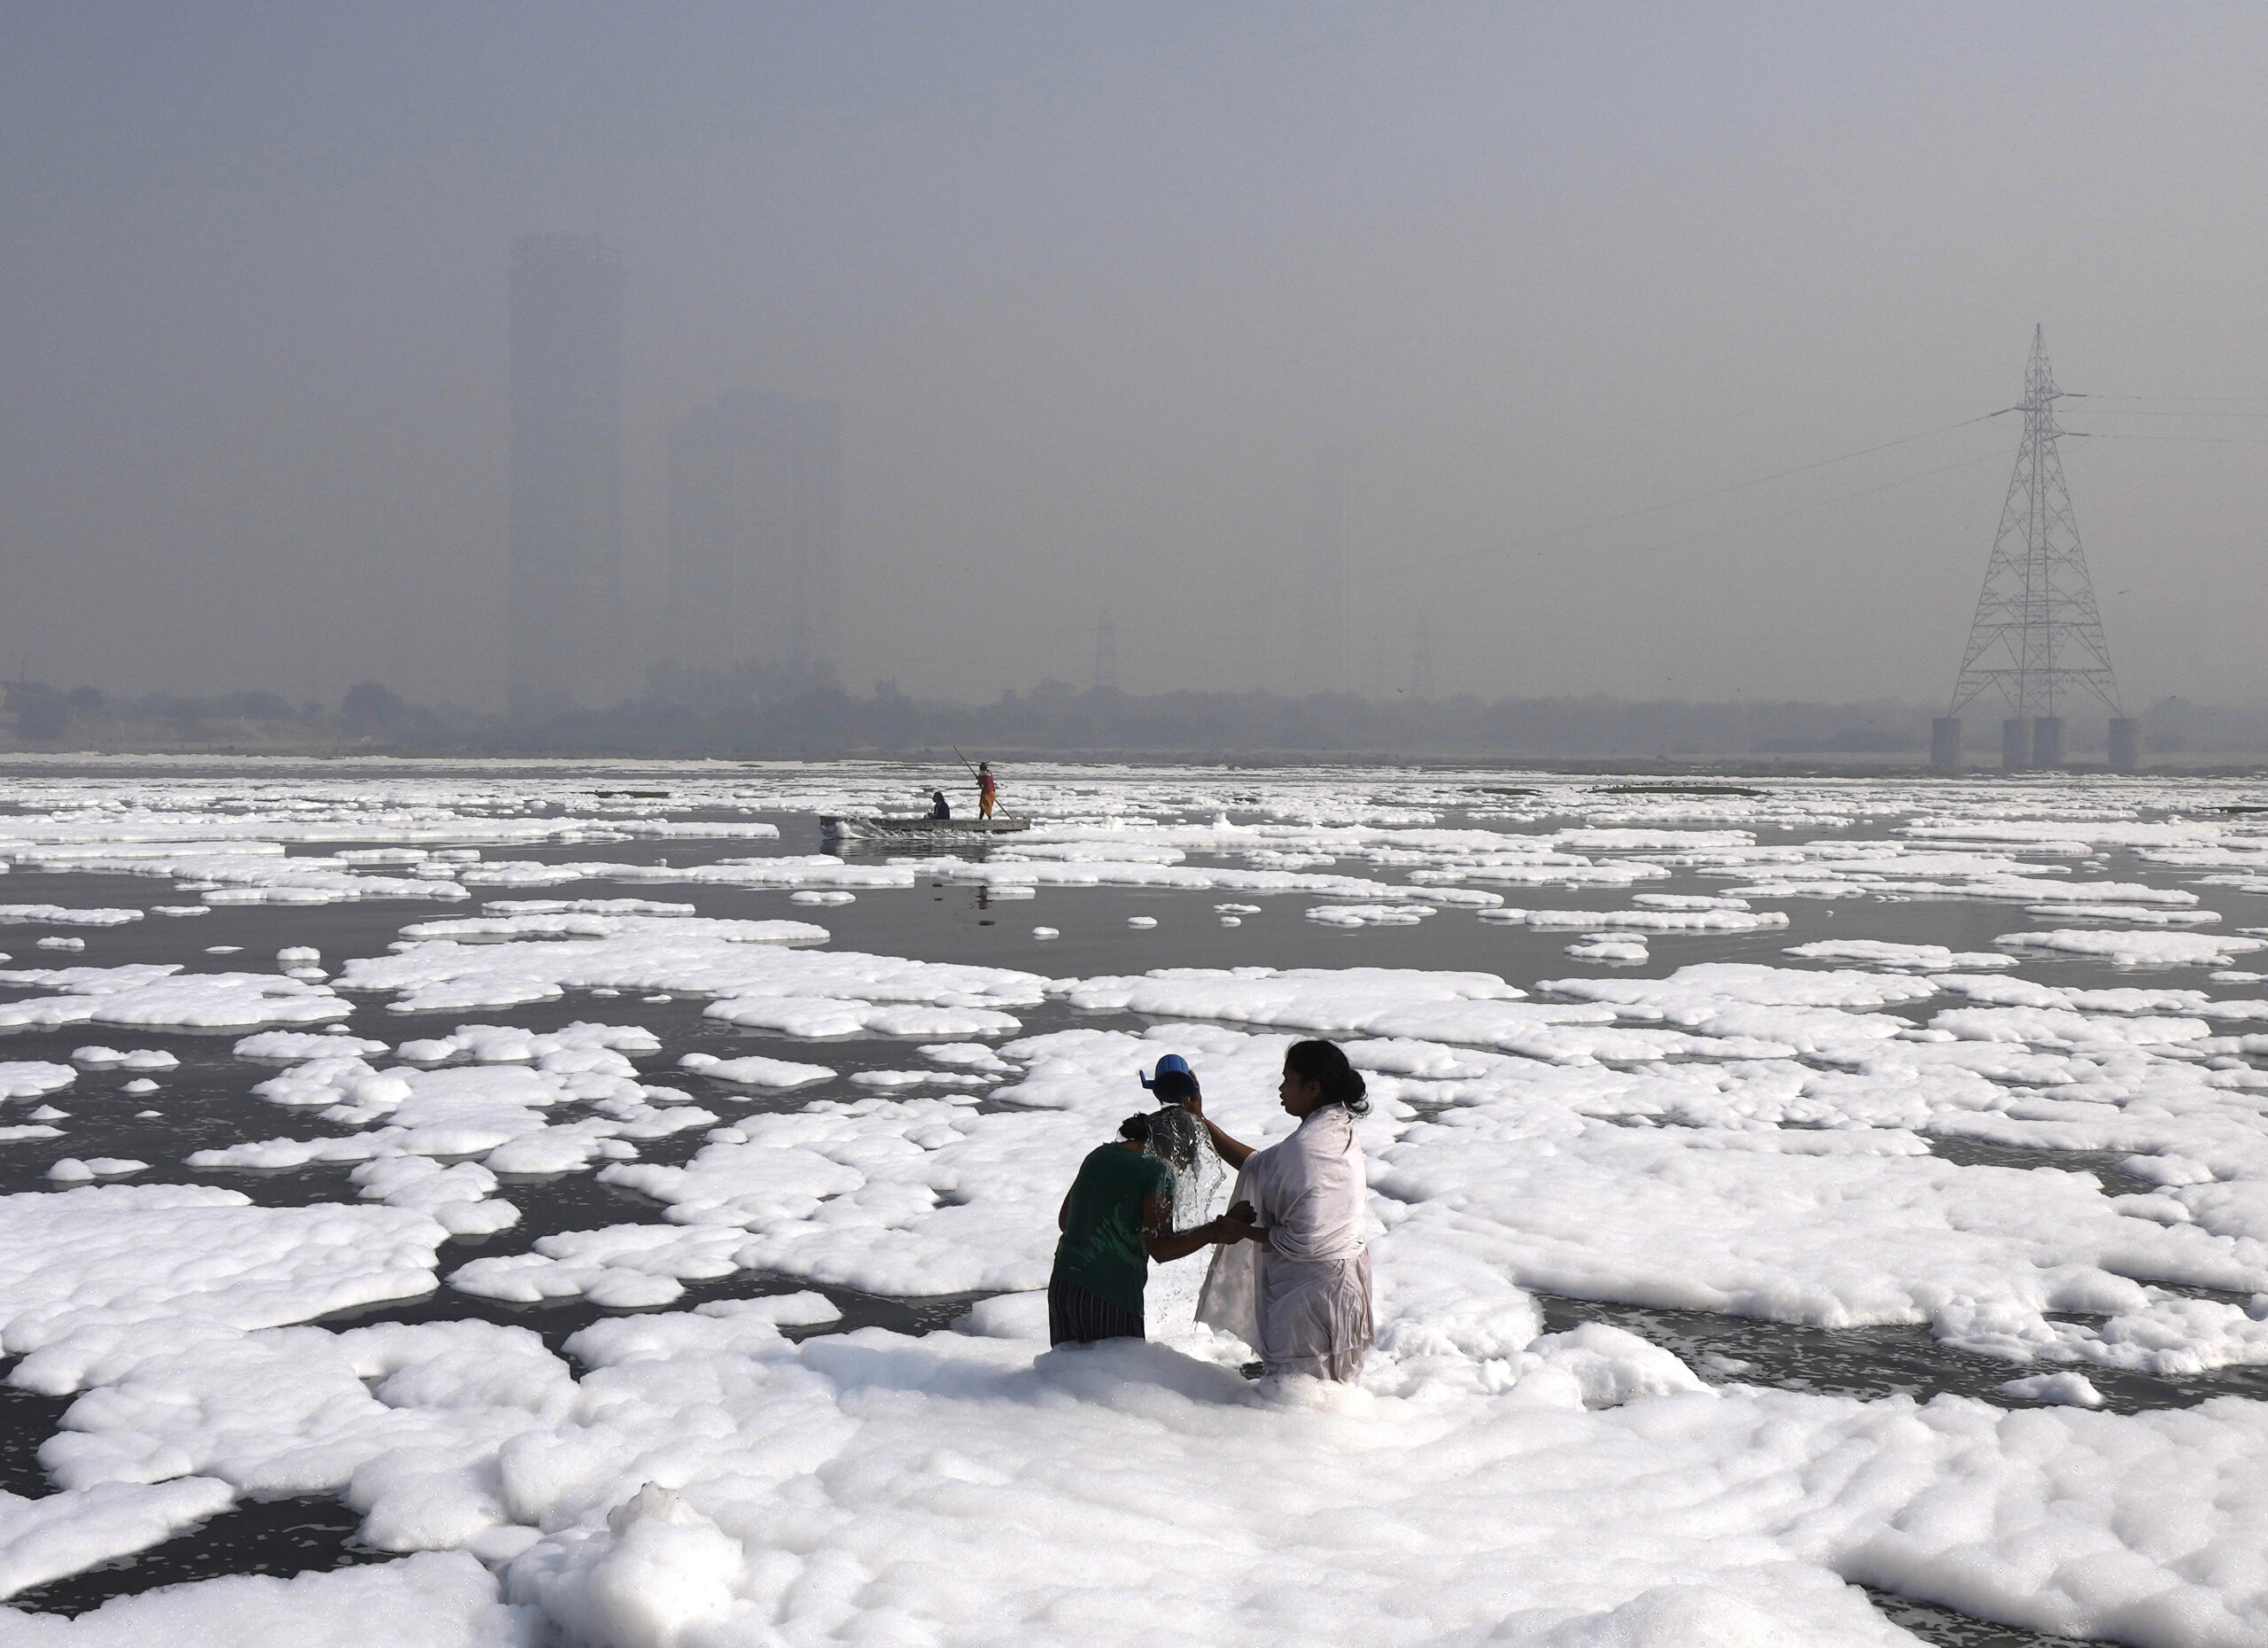 Two women in a polluted river next to smog-filled city